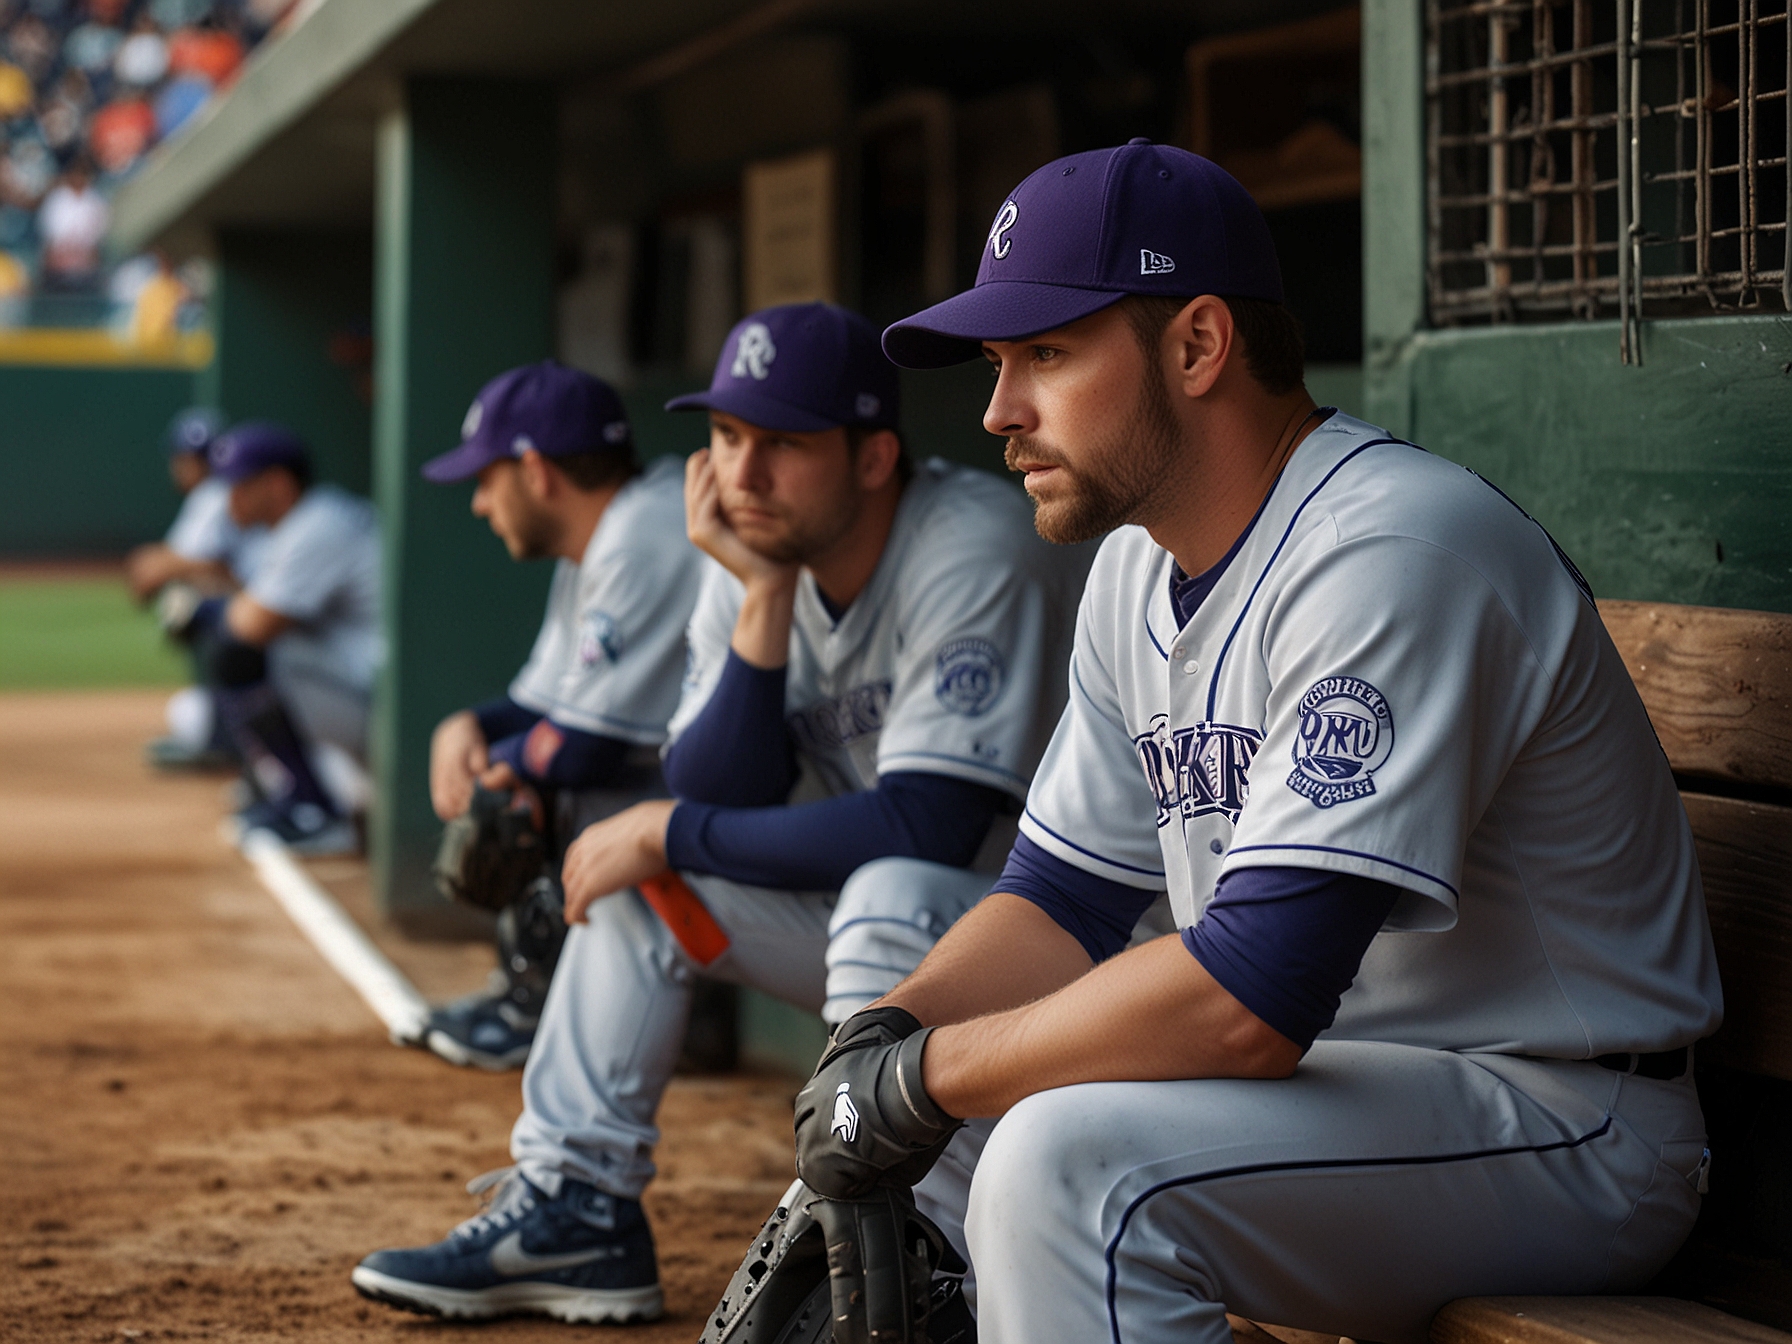 Rockies teammates looking dejected in the dugout after another lost game, depicting the frustration and inconsistency plaguing the team despite individual standout performances.